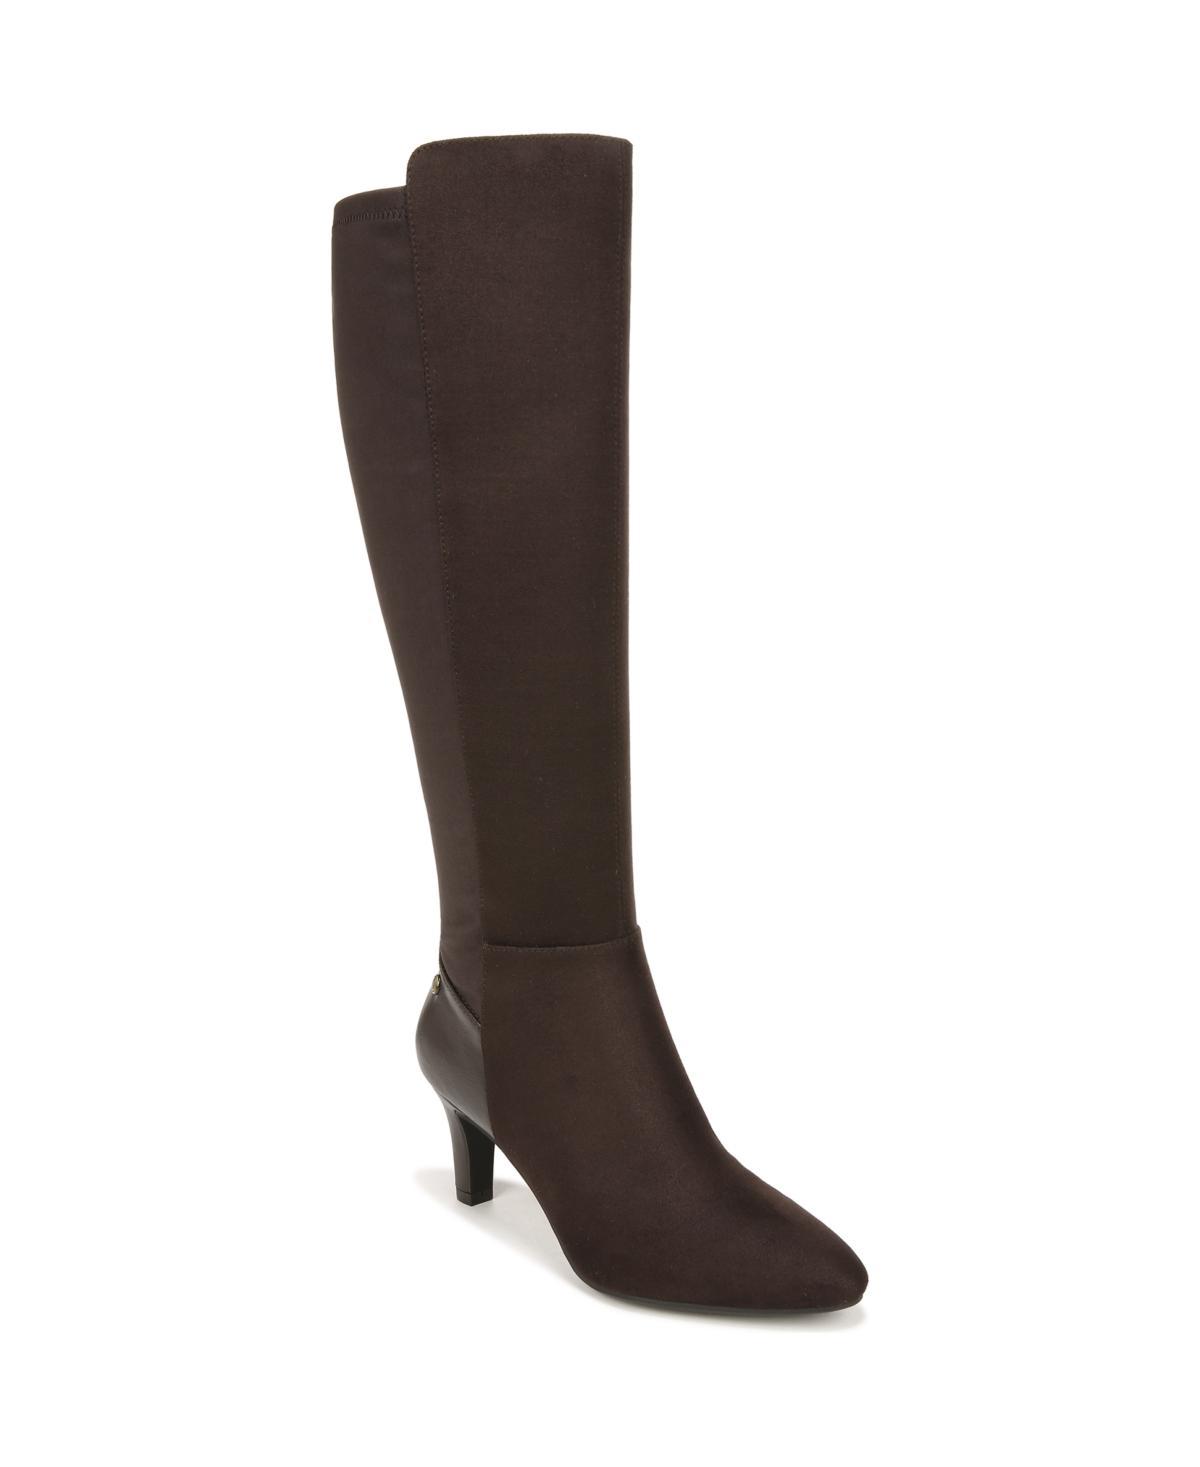 LifeStride Gracie Knee High Boot Product Image